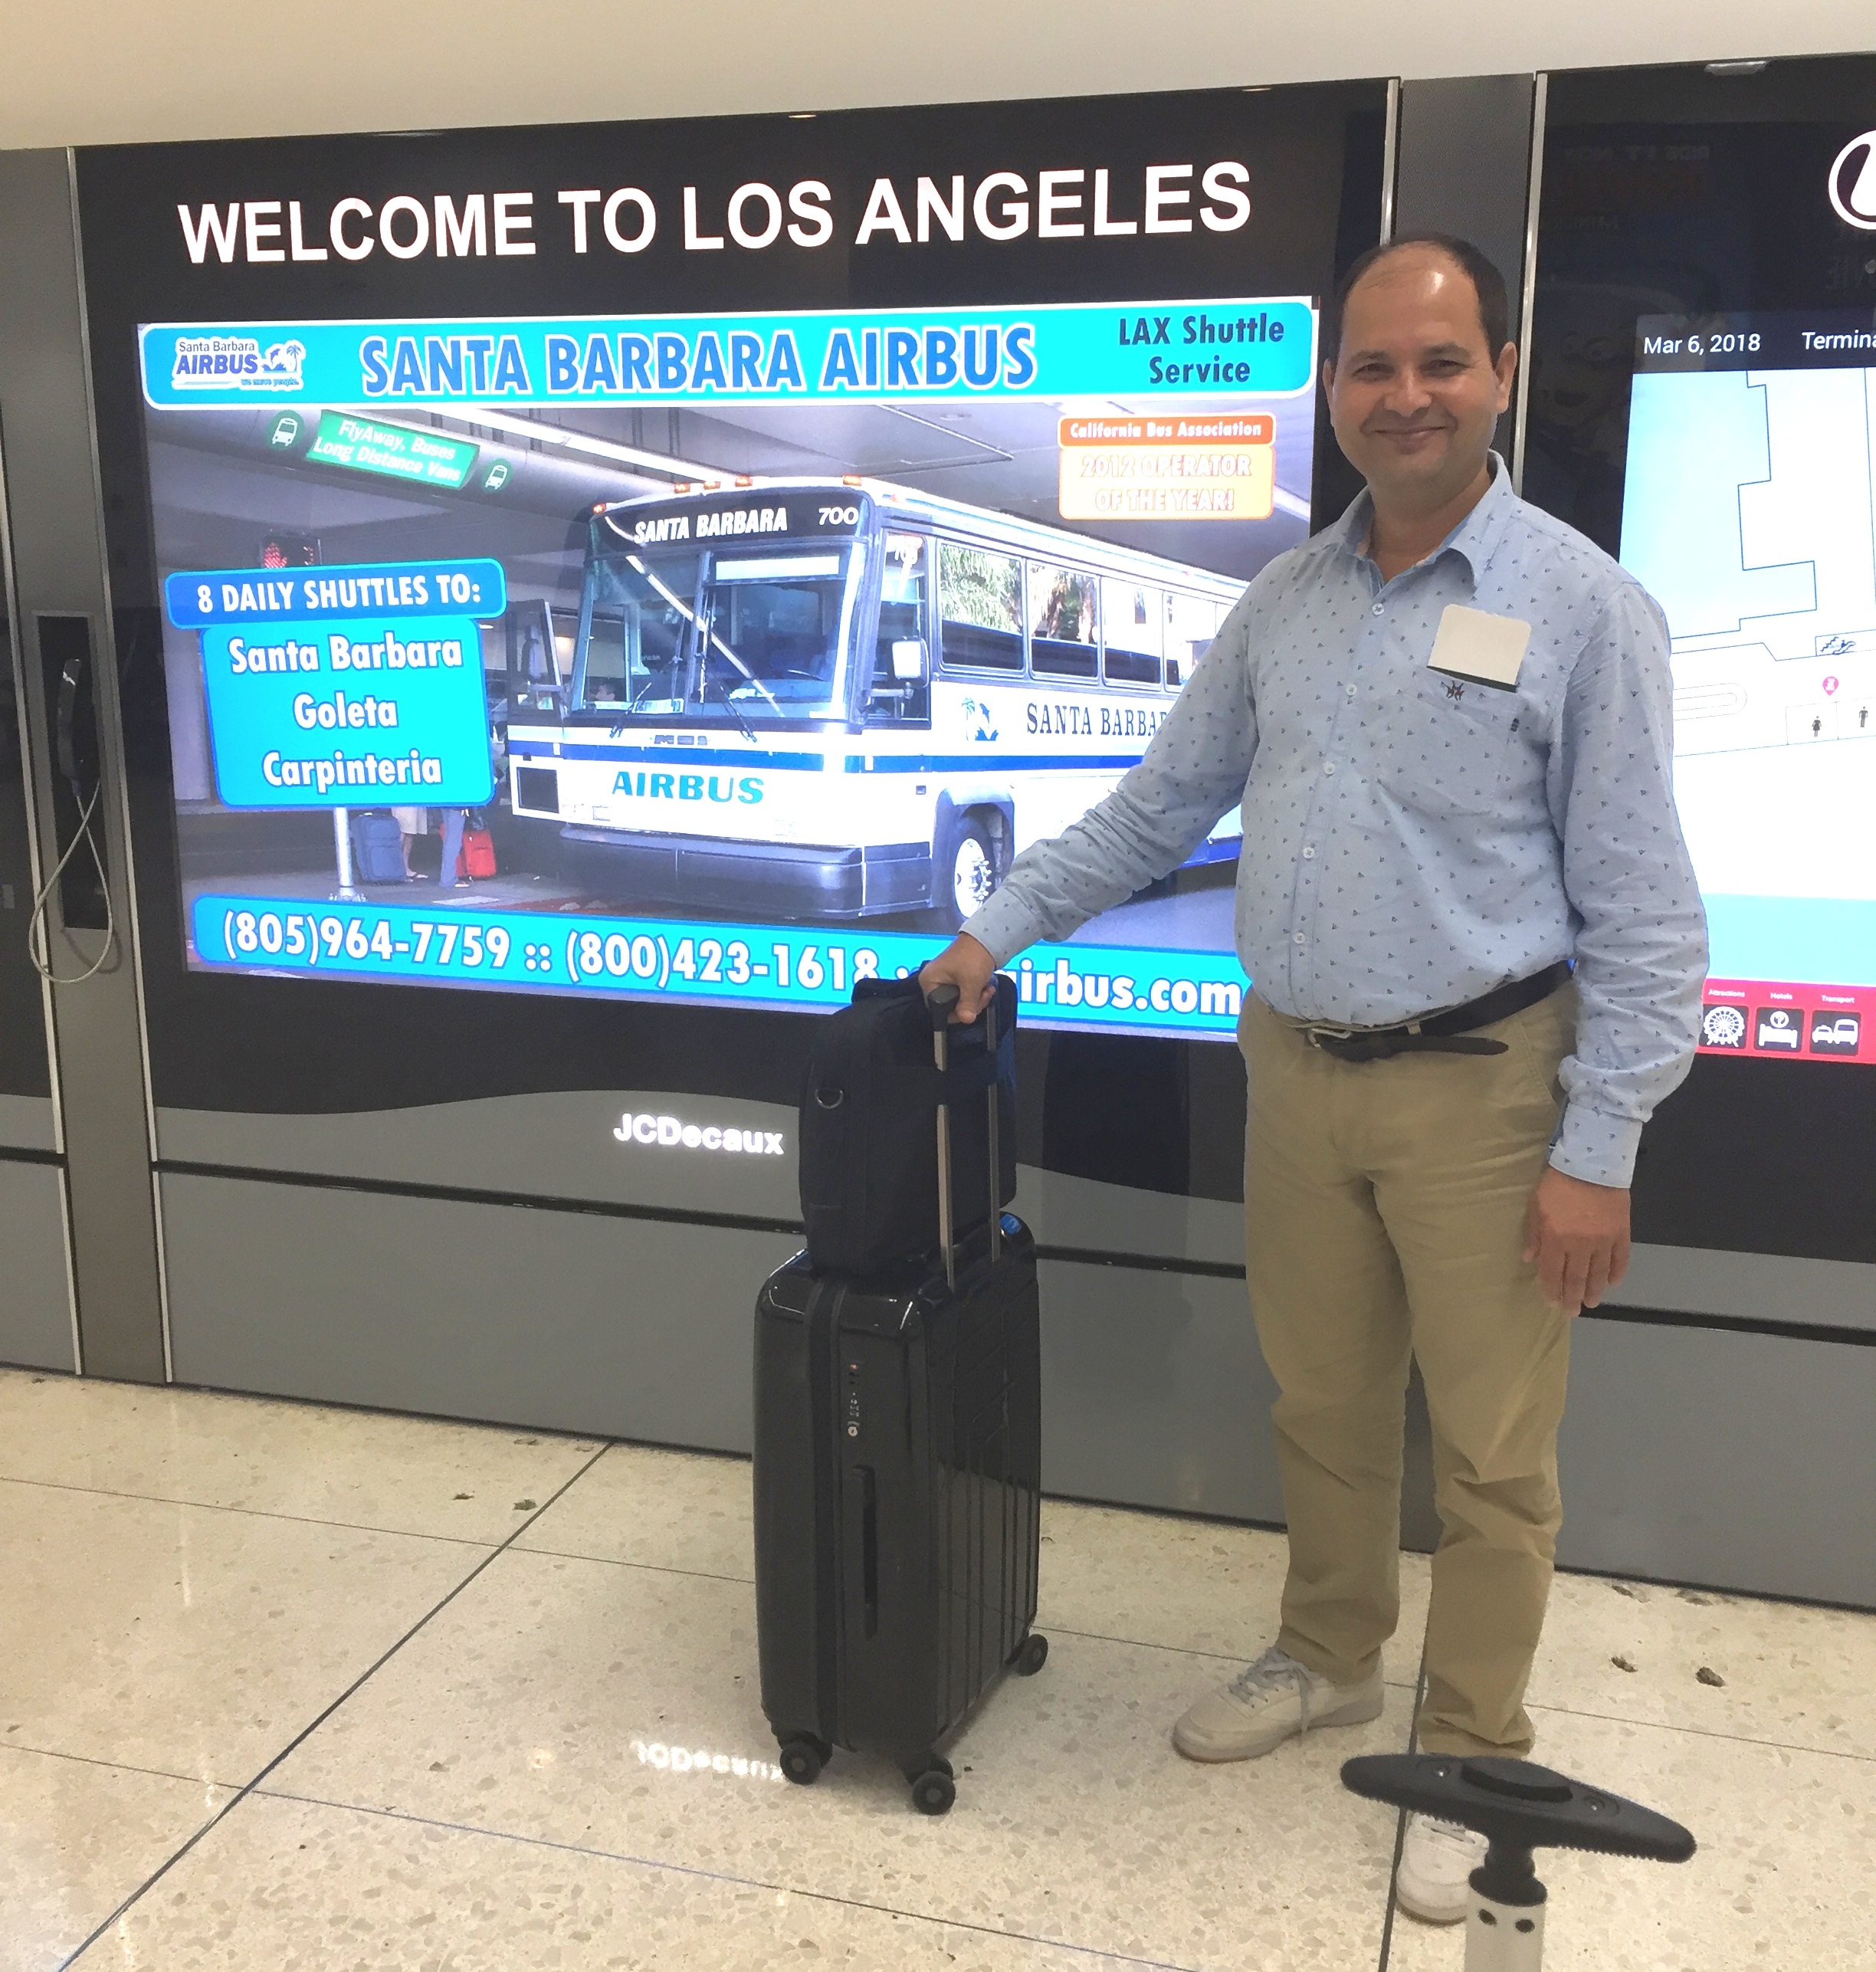 Prepared to fly from Los Angelos to San Diego, the USA to attend the conference organised by the Society for Reproductive Investigation (SRI).